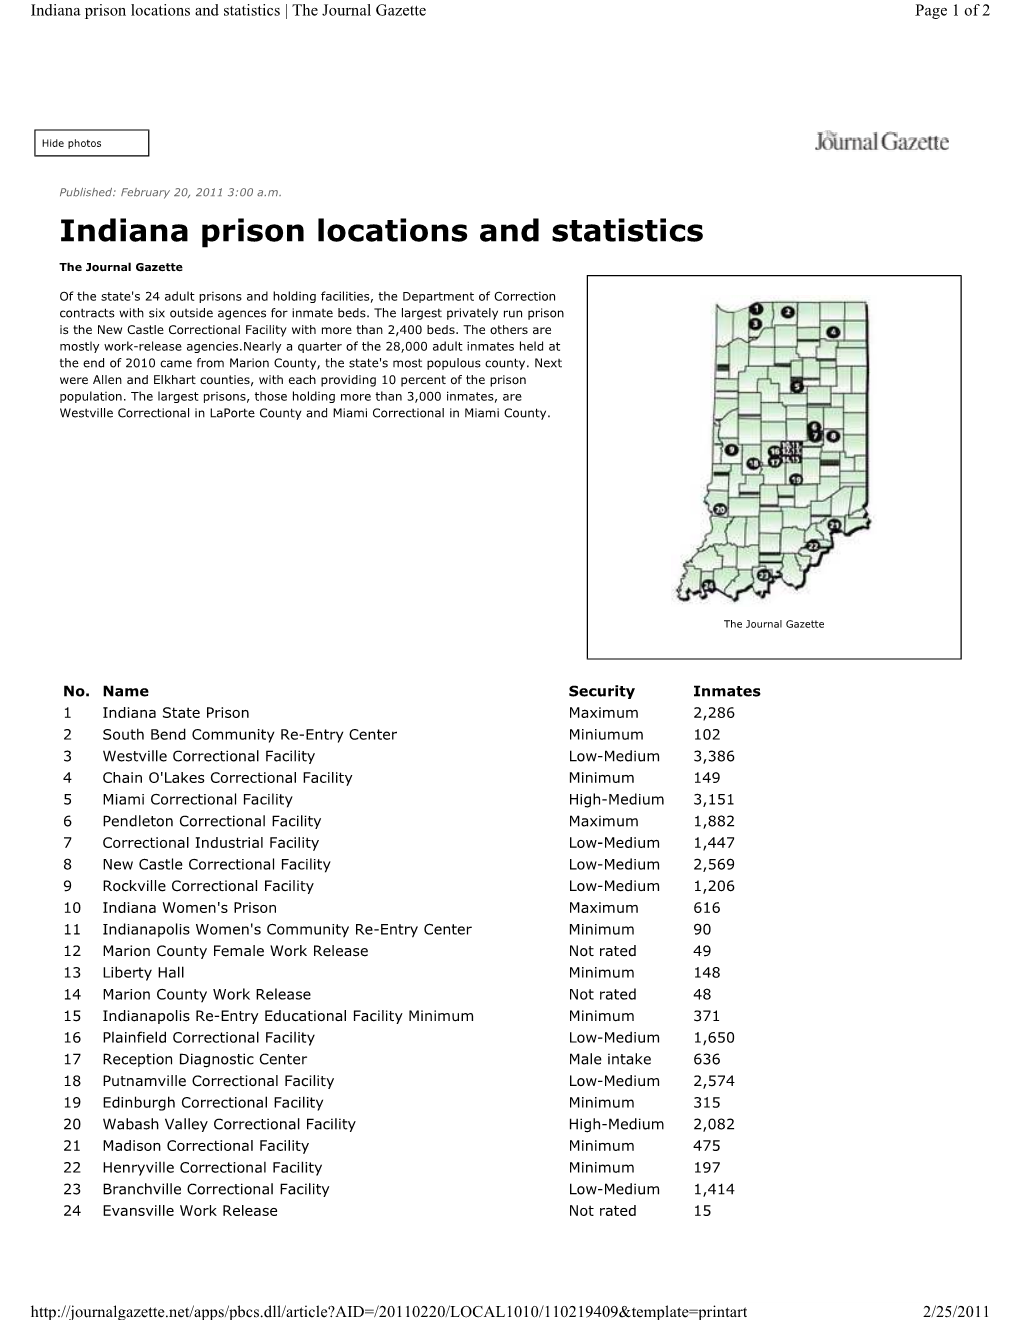 Indiana Prison Locations and Statistics | the Journal Gazette Page 1 of 2